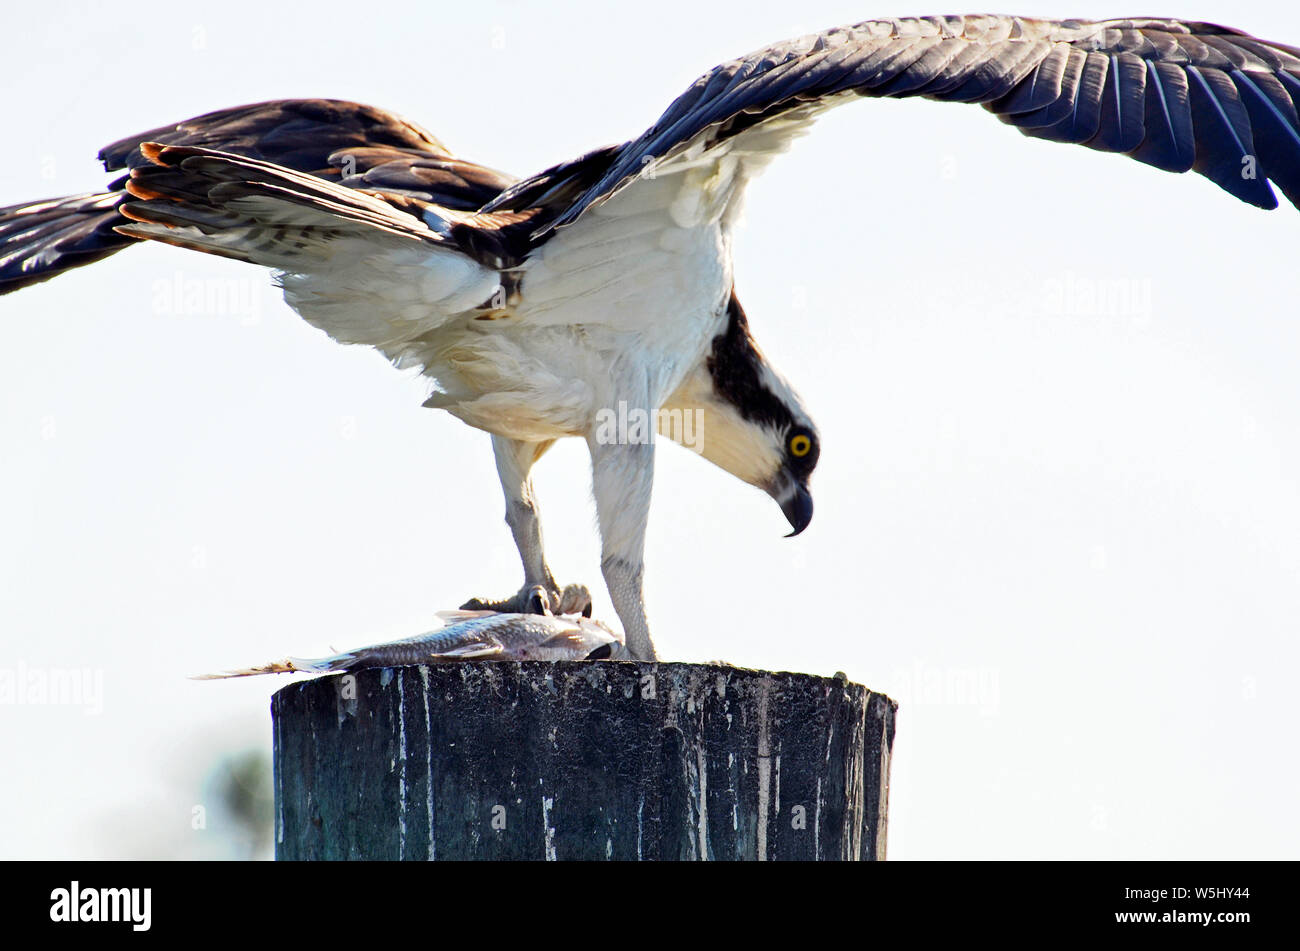 Osprey, or sea hawk eating fresh caught fish glowing pink on top of piling, showing wings folded, bright yellow eye, and curved beak. Stock Photo